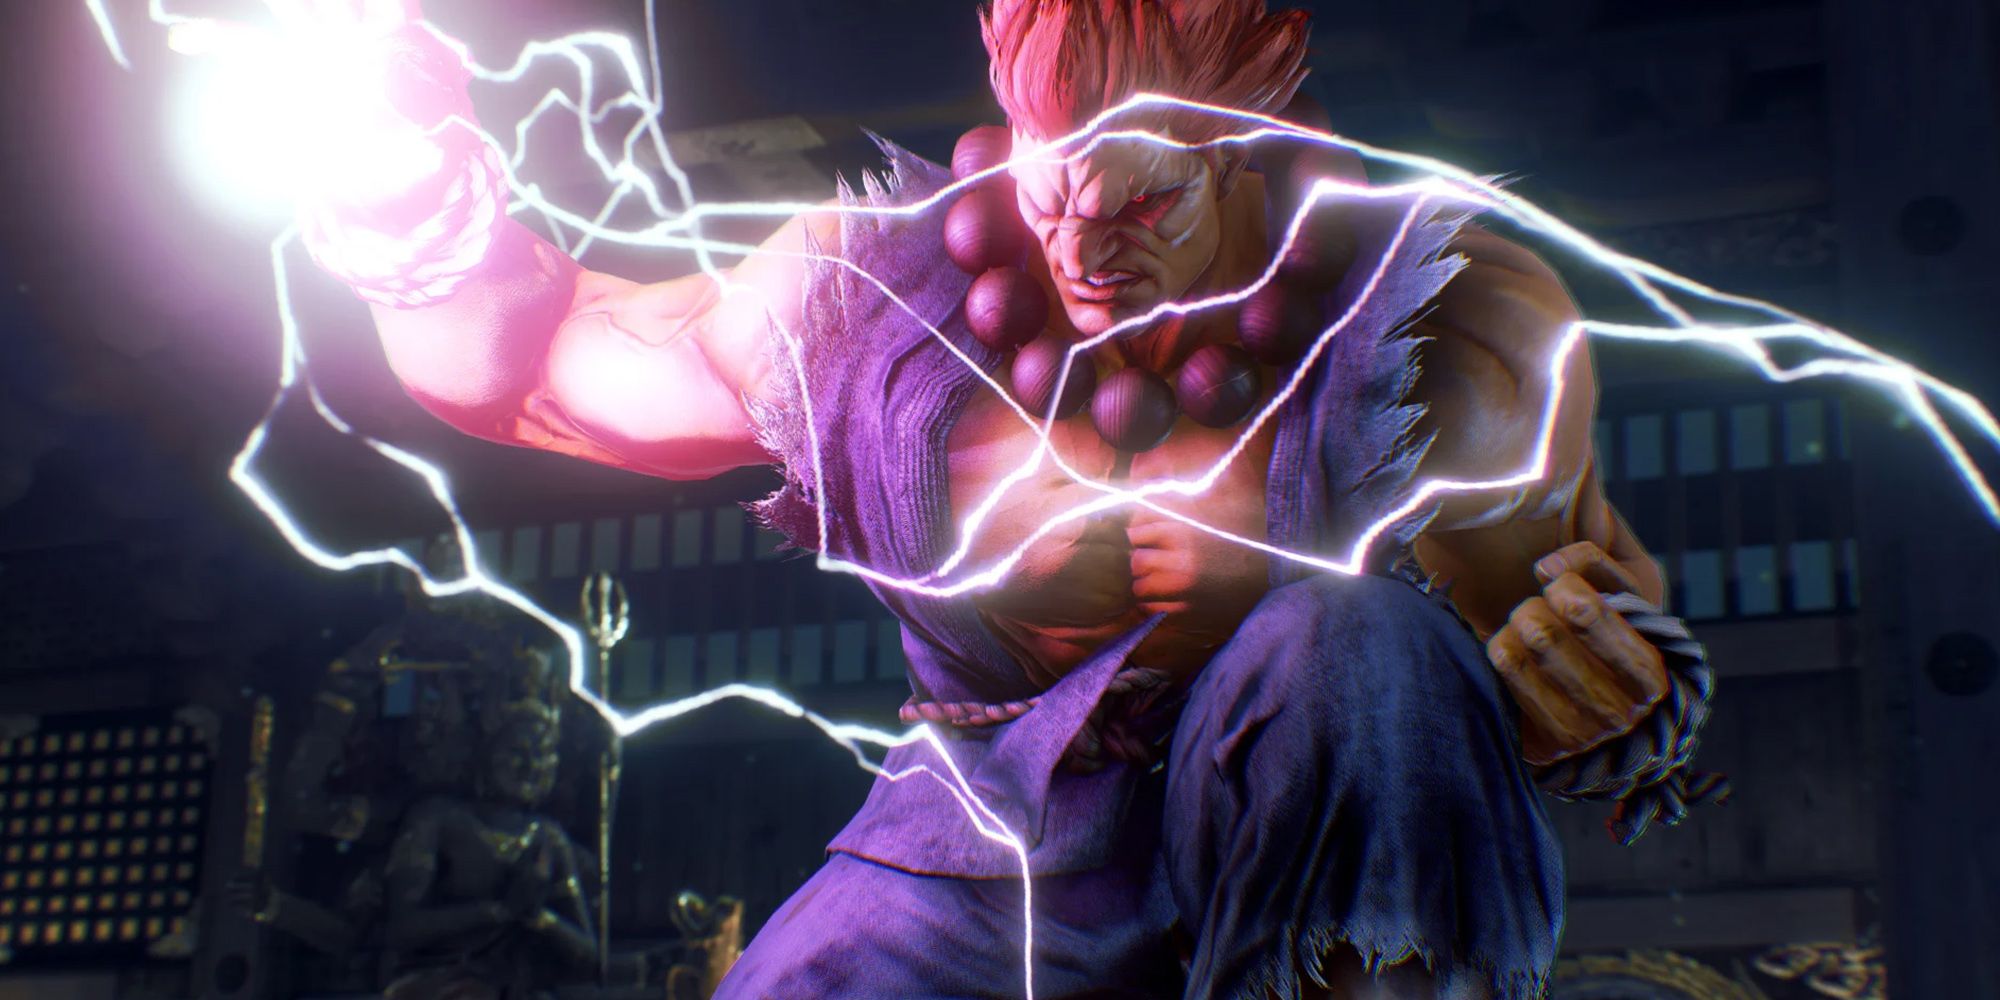 Akuma clenching one fist while lighting comes out of the other